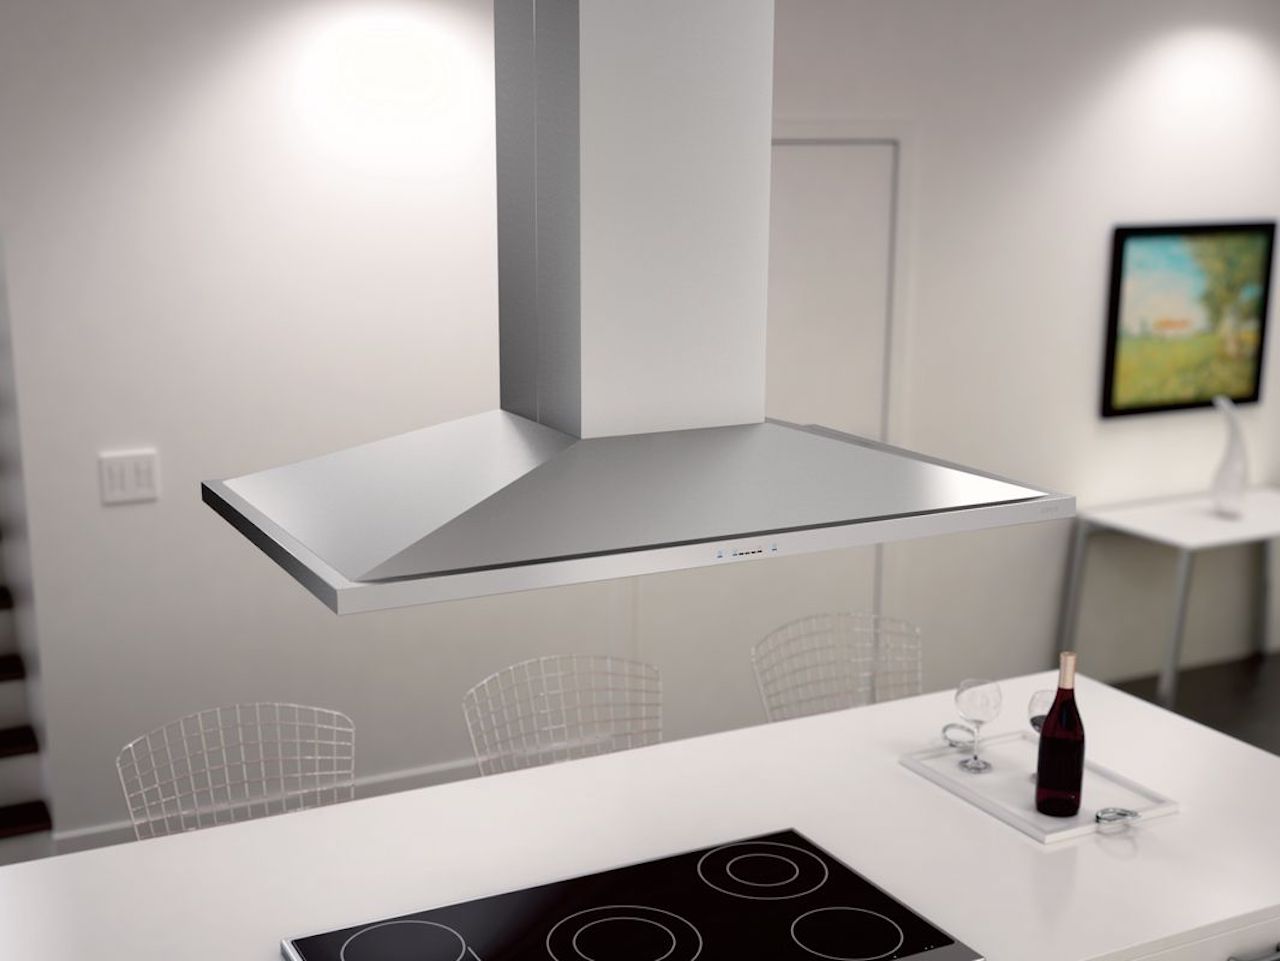 Range hood inserts are low profile and can be hidden beautifully under  cabinetry. Just check …